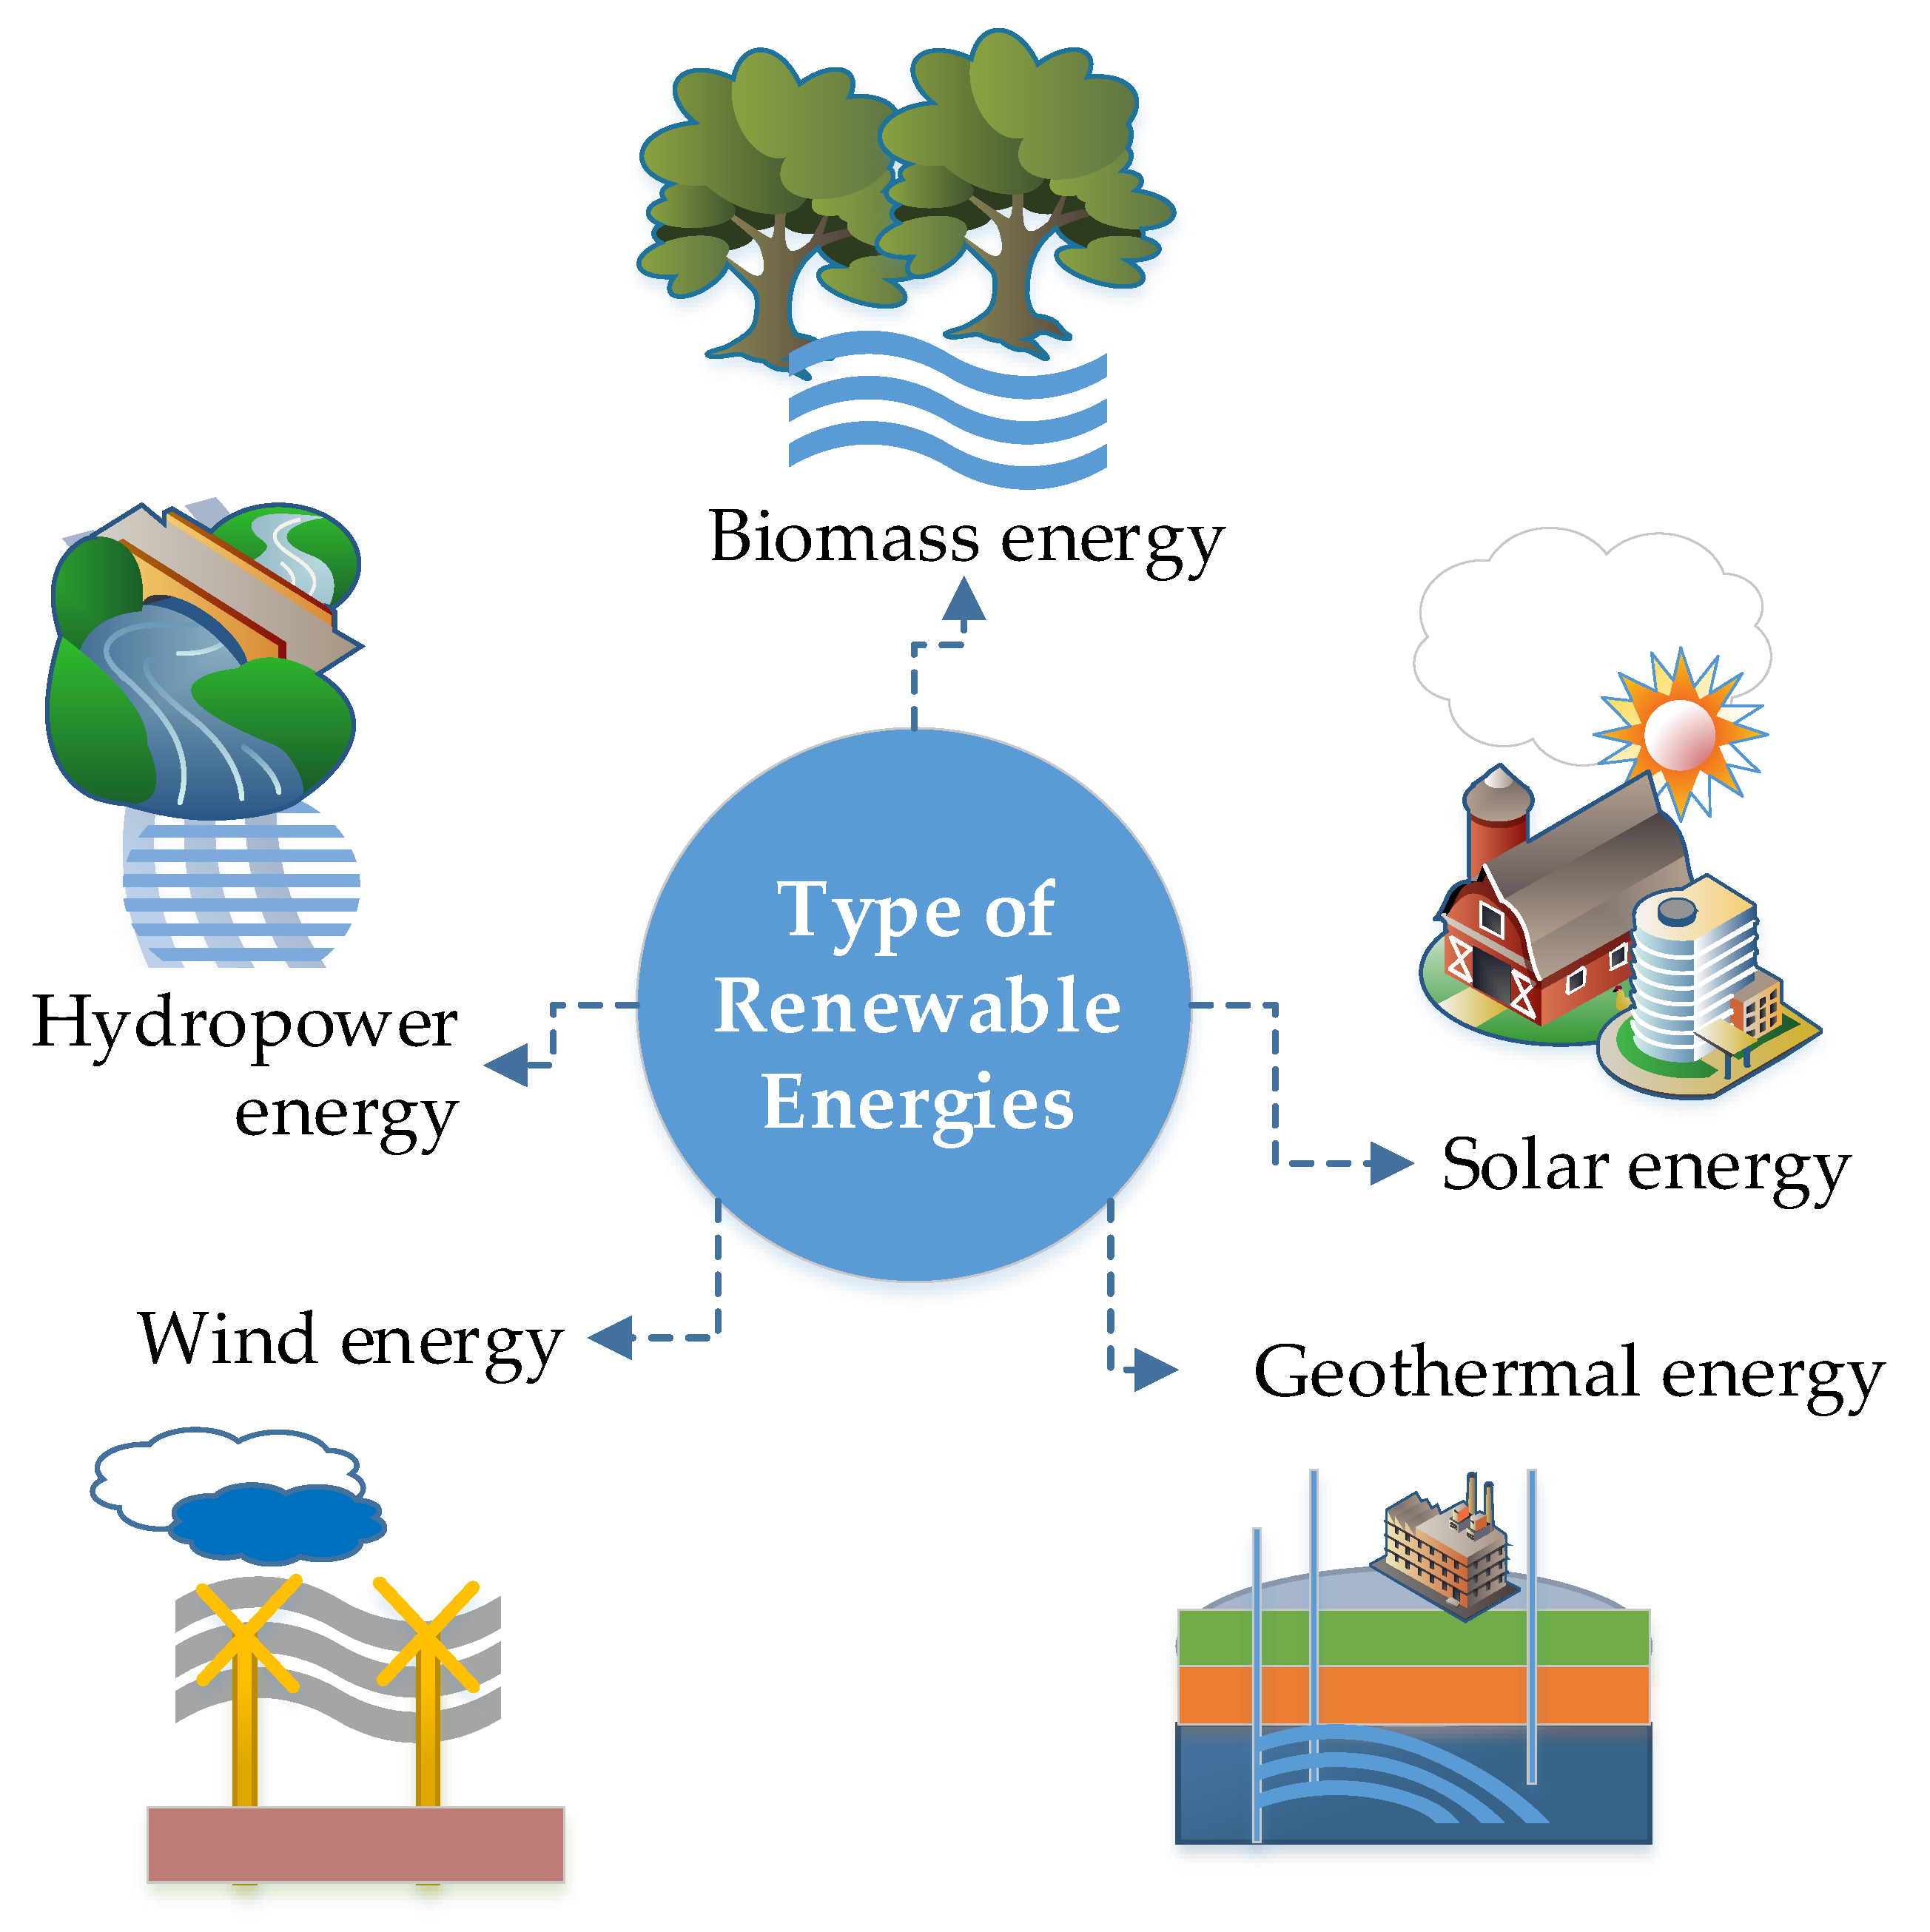 What Are the Main Barriers to Renewable Energy? - Environment Co